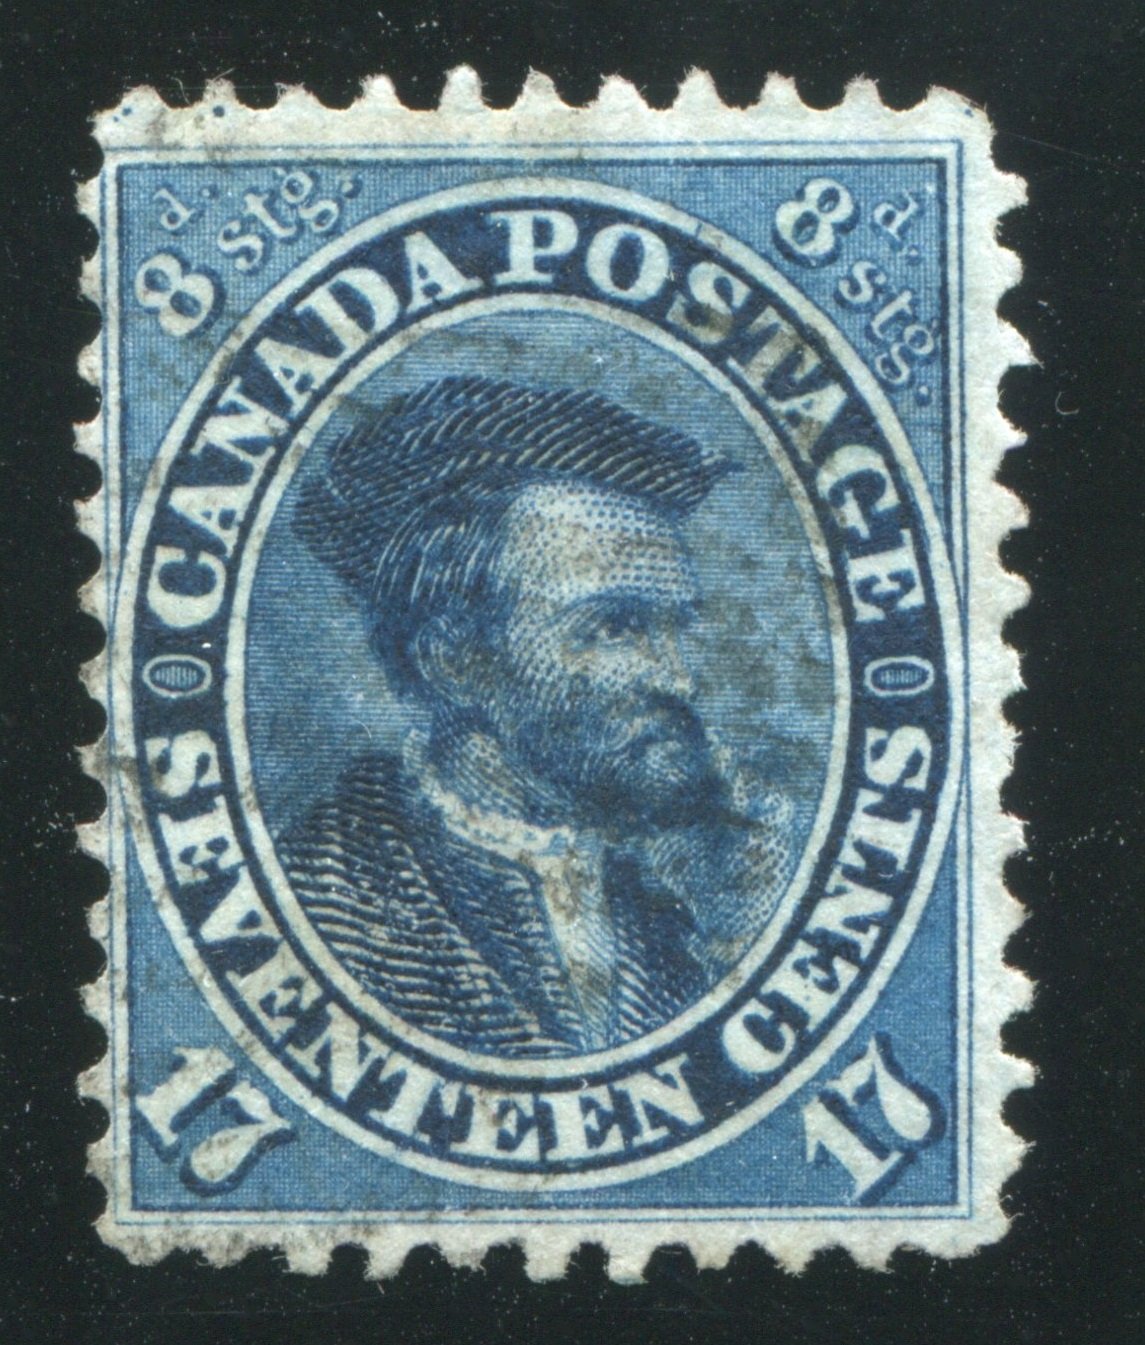 0019CA1708 - Canada #19iv - Used, Major Re-Entry